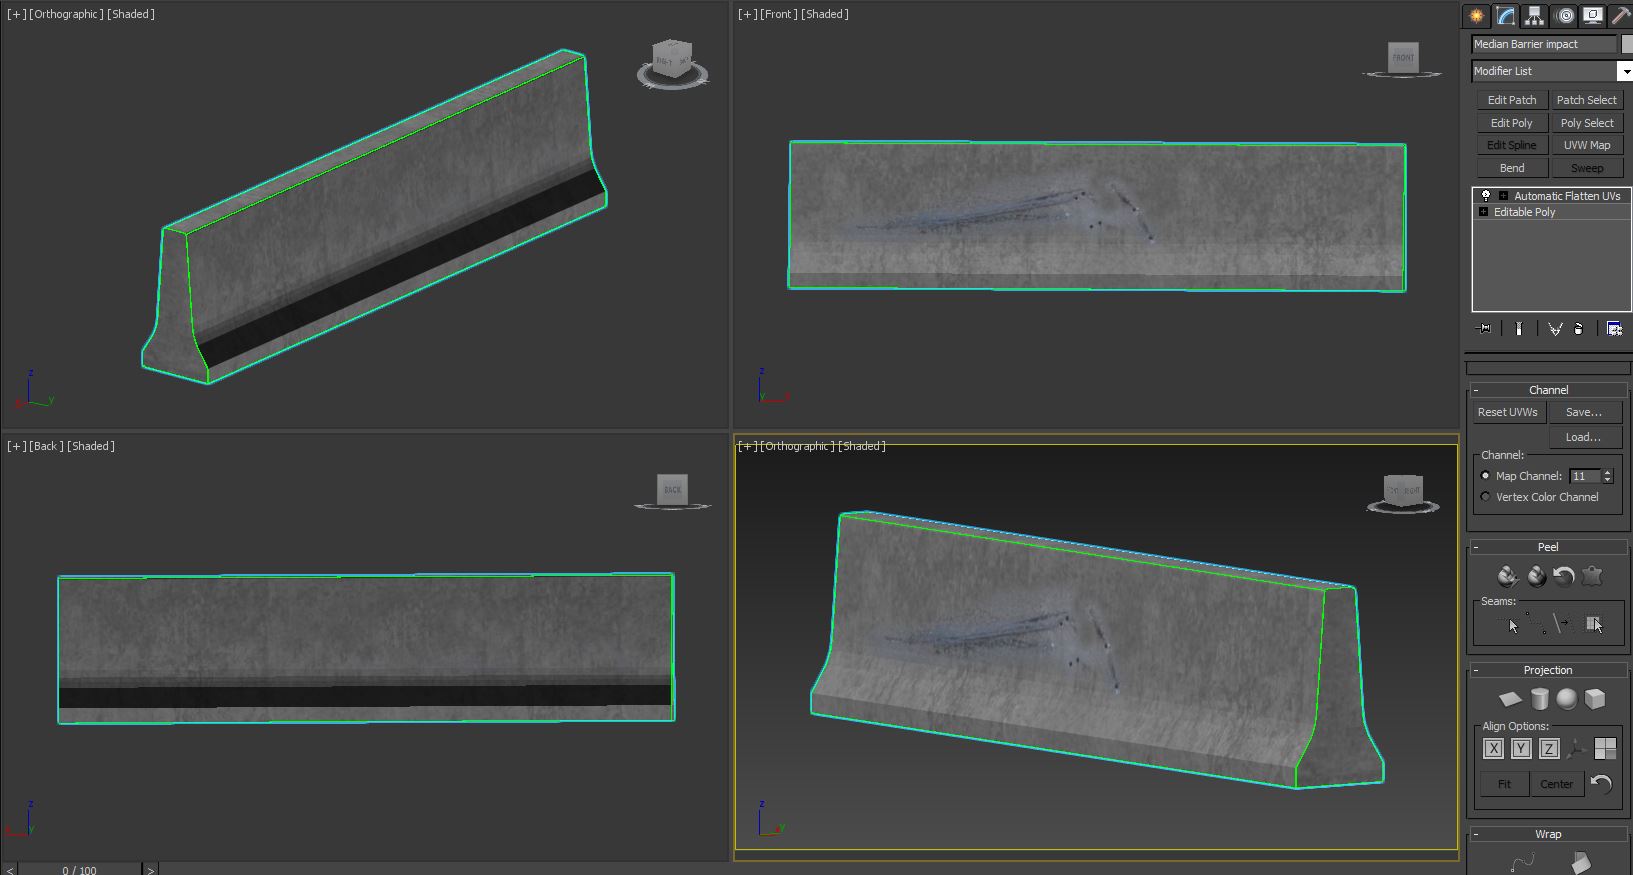 Solved: exporting models with textures as .obj - Autodesk Community - 3ds  Max